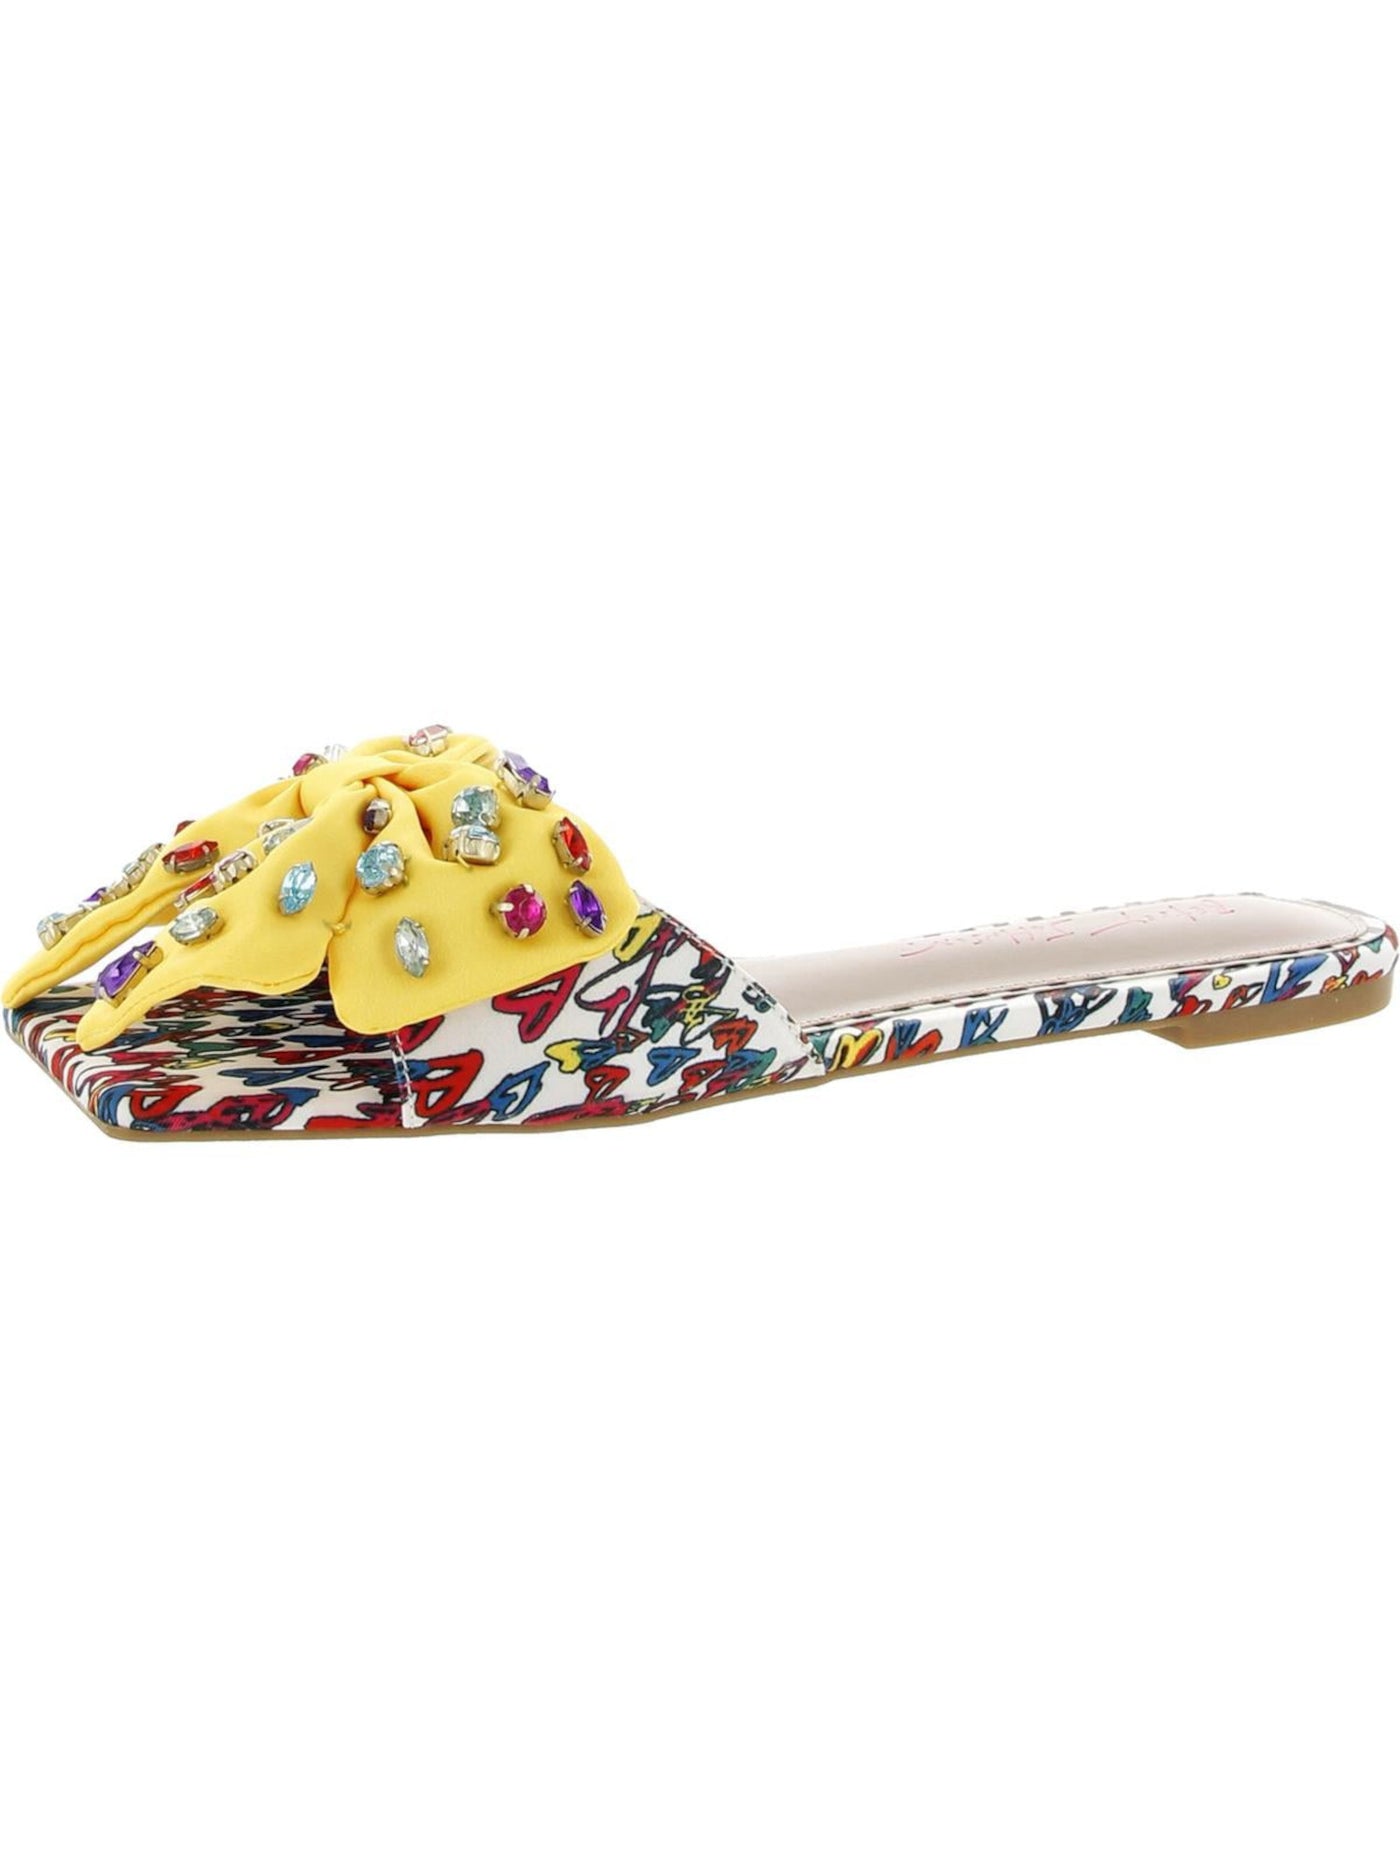 BETSEY JOHNSON Womens Yellow Patterned Bow Accent Embellished Daisy-r Square Toe Slip On Sandals Shoes 5.5 M